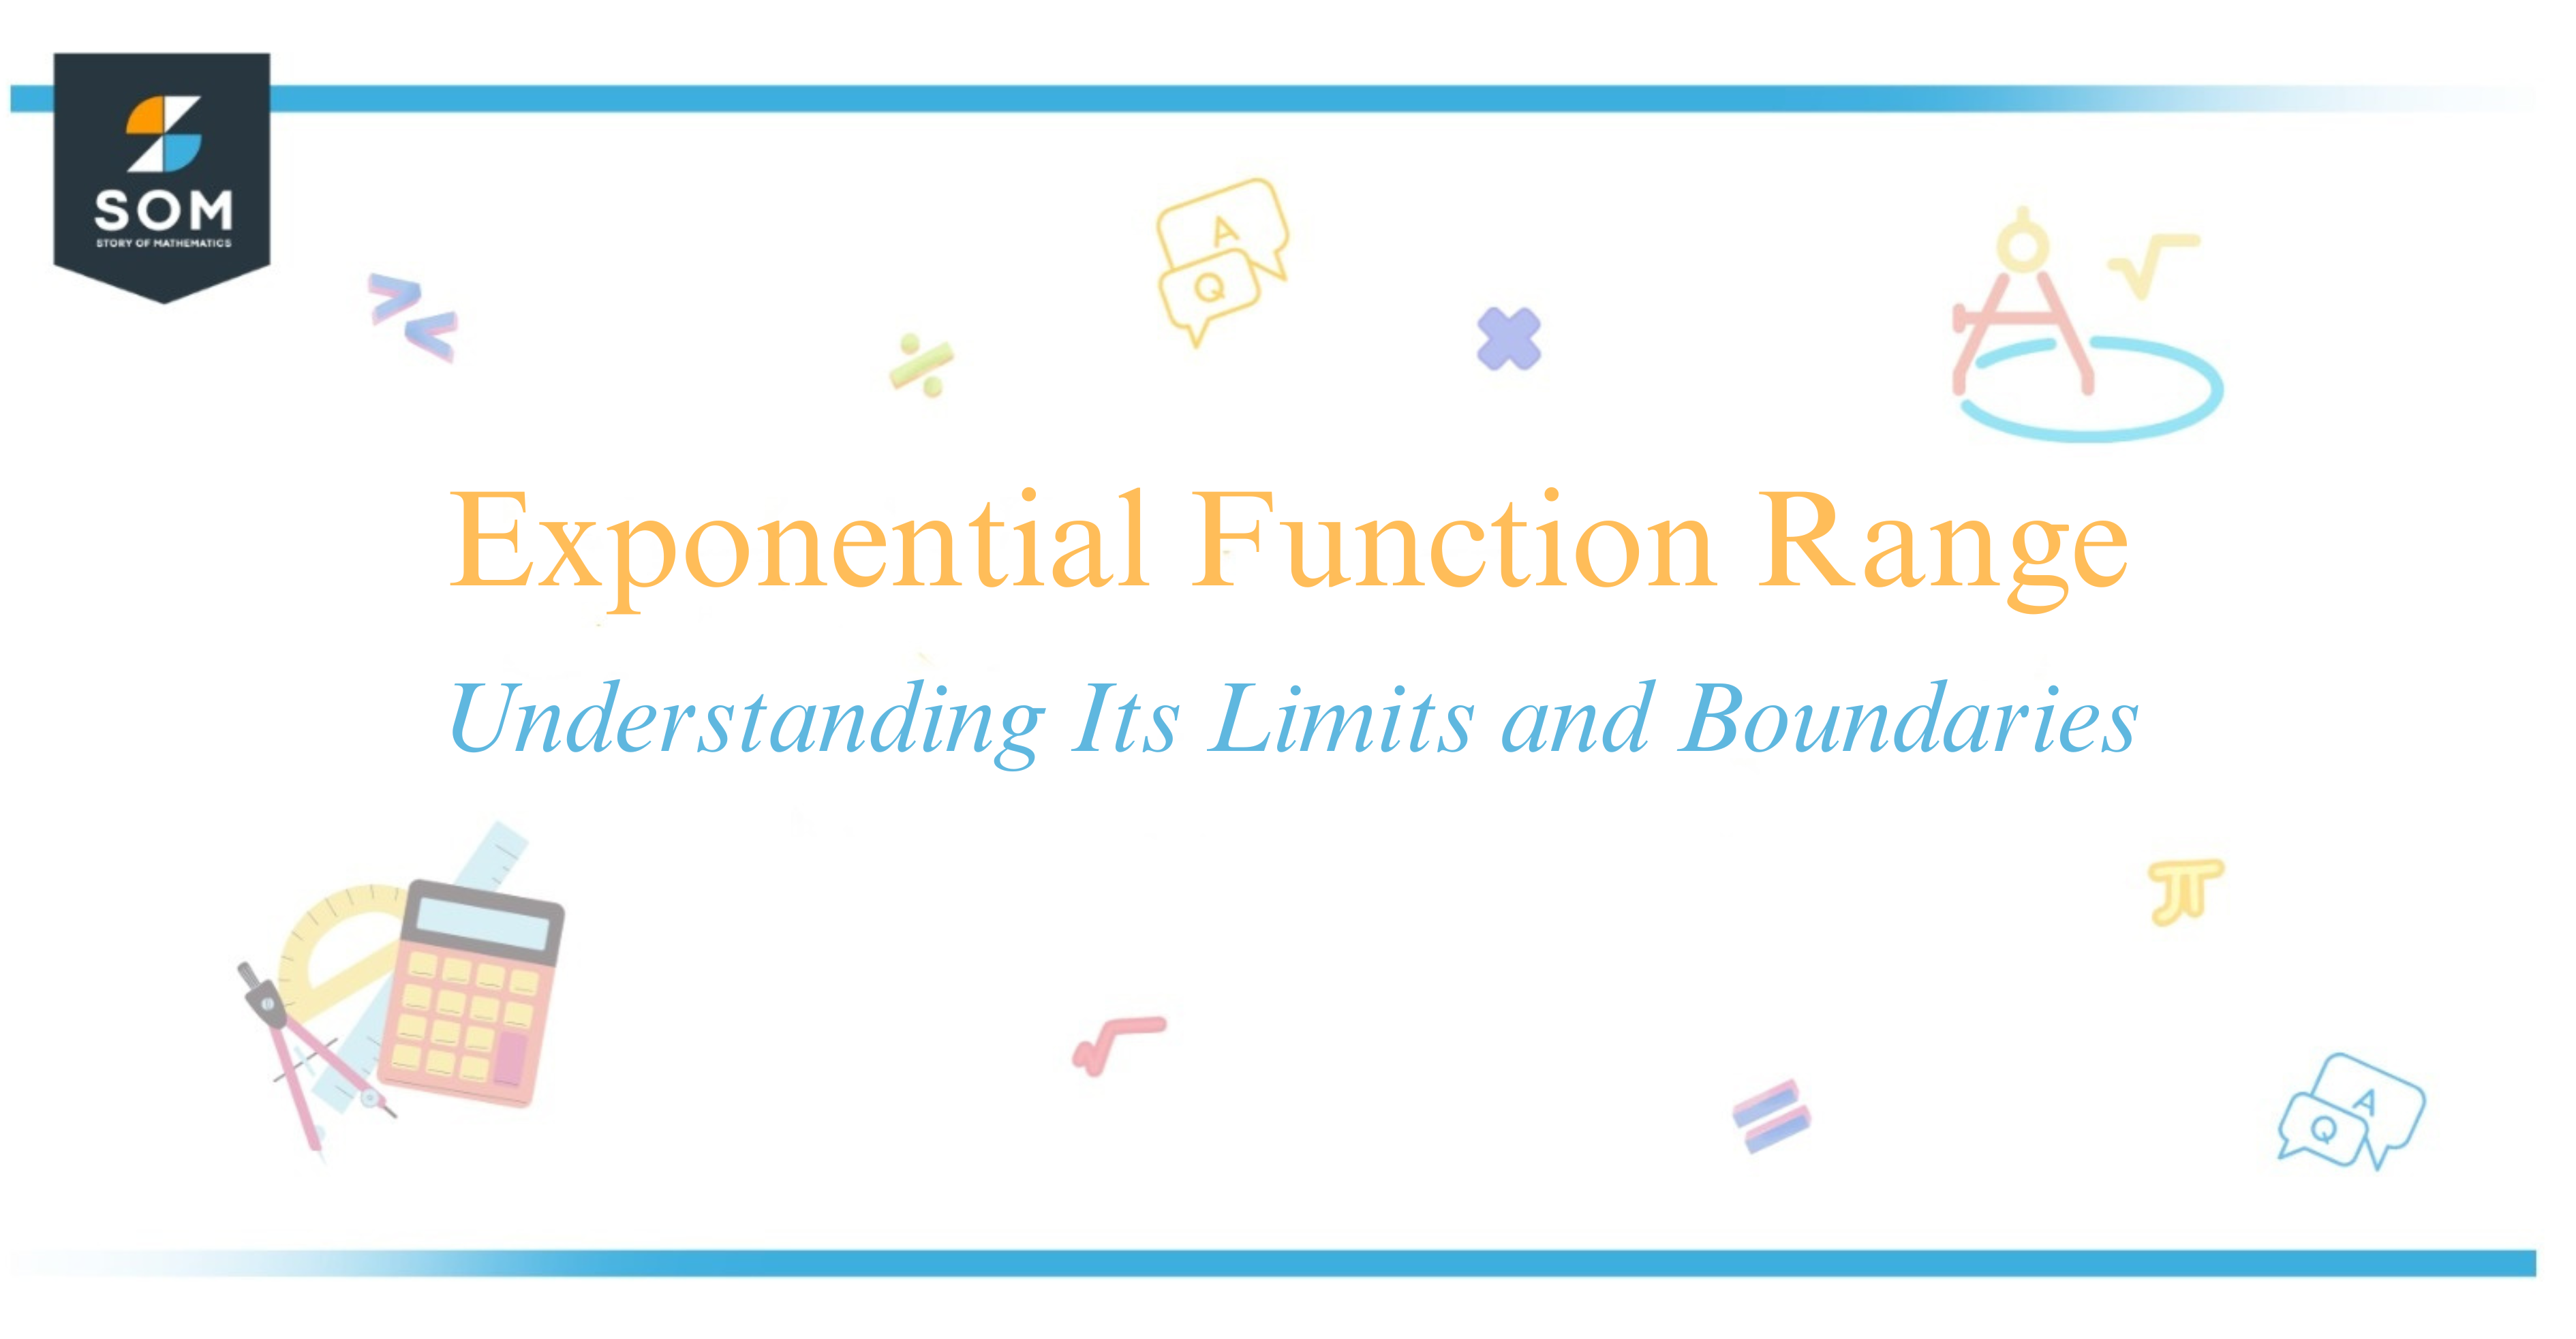 Exponential Function Range Understanding Its Limits and Boundaries